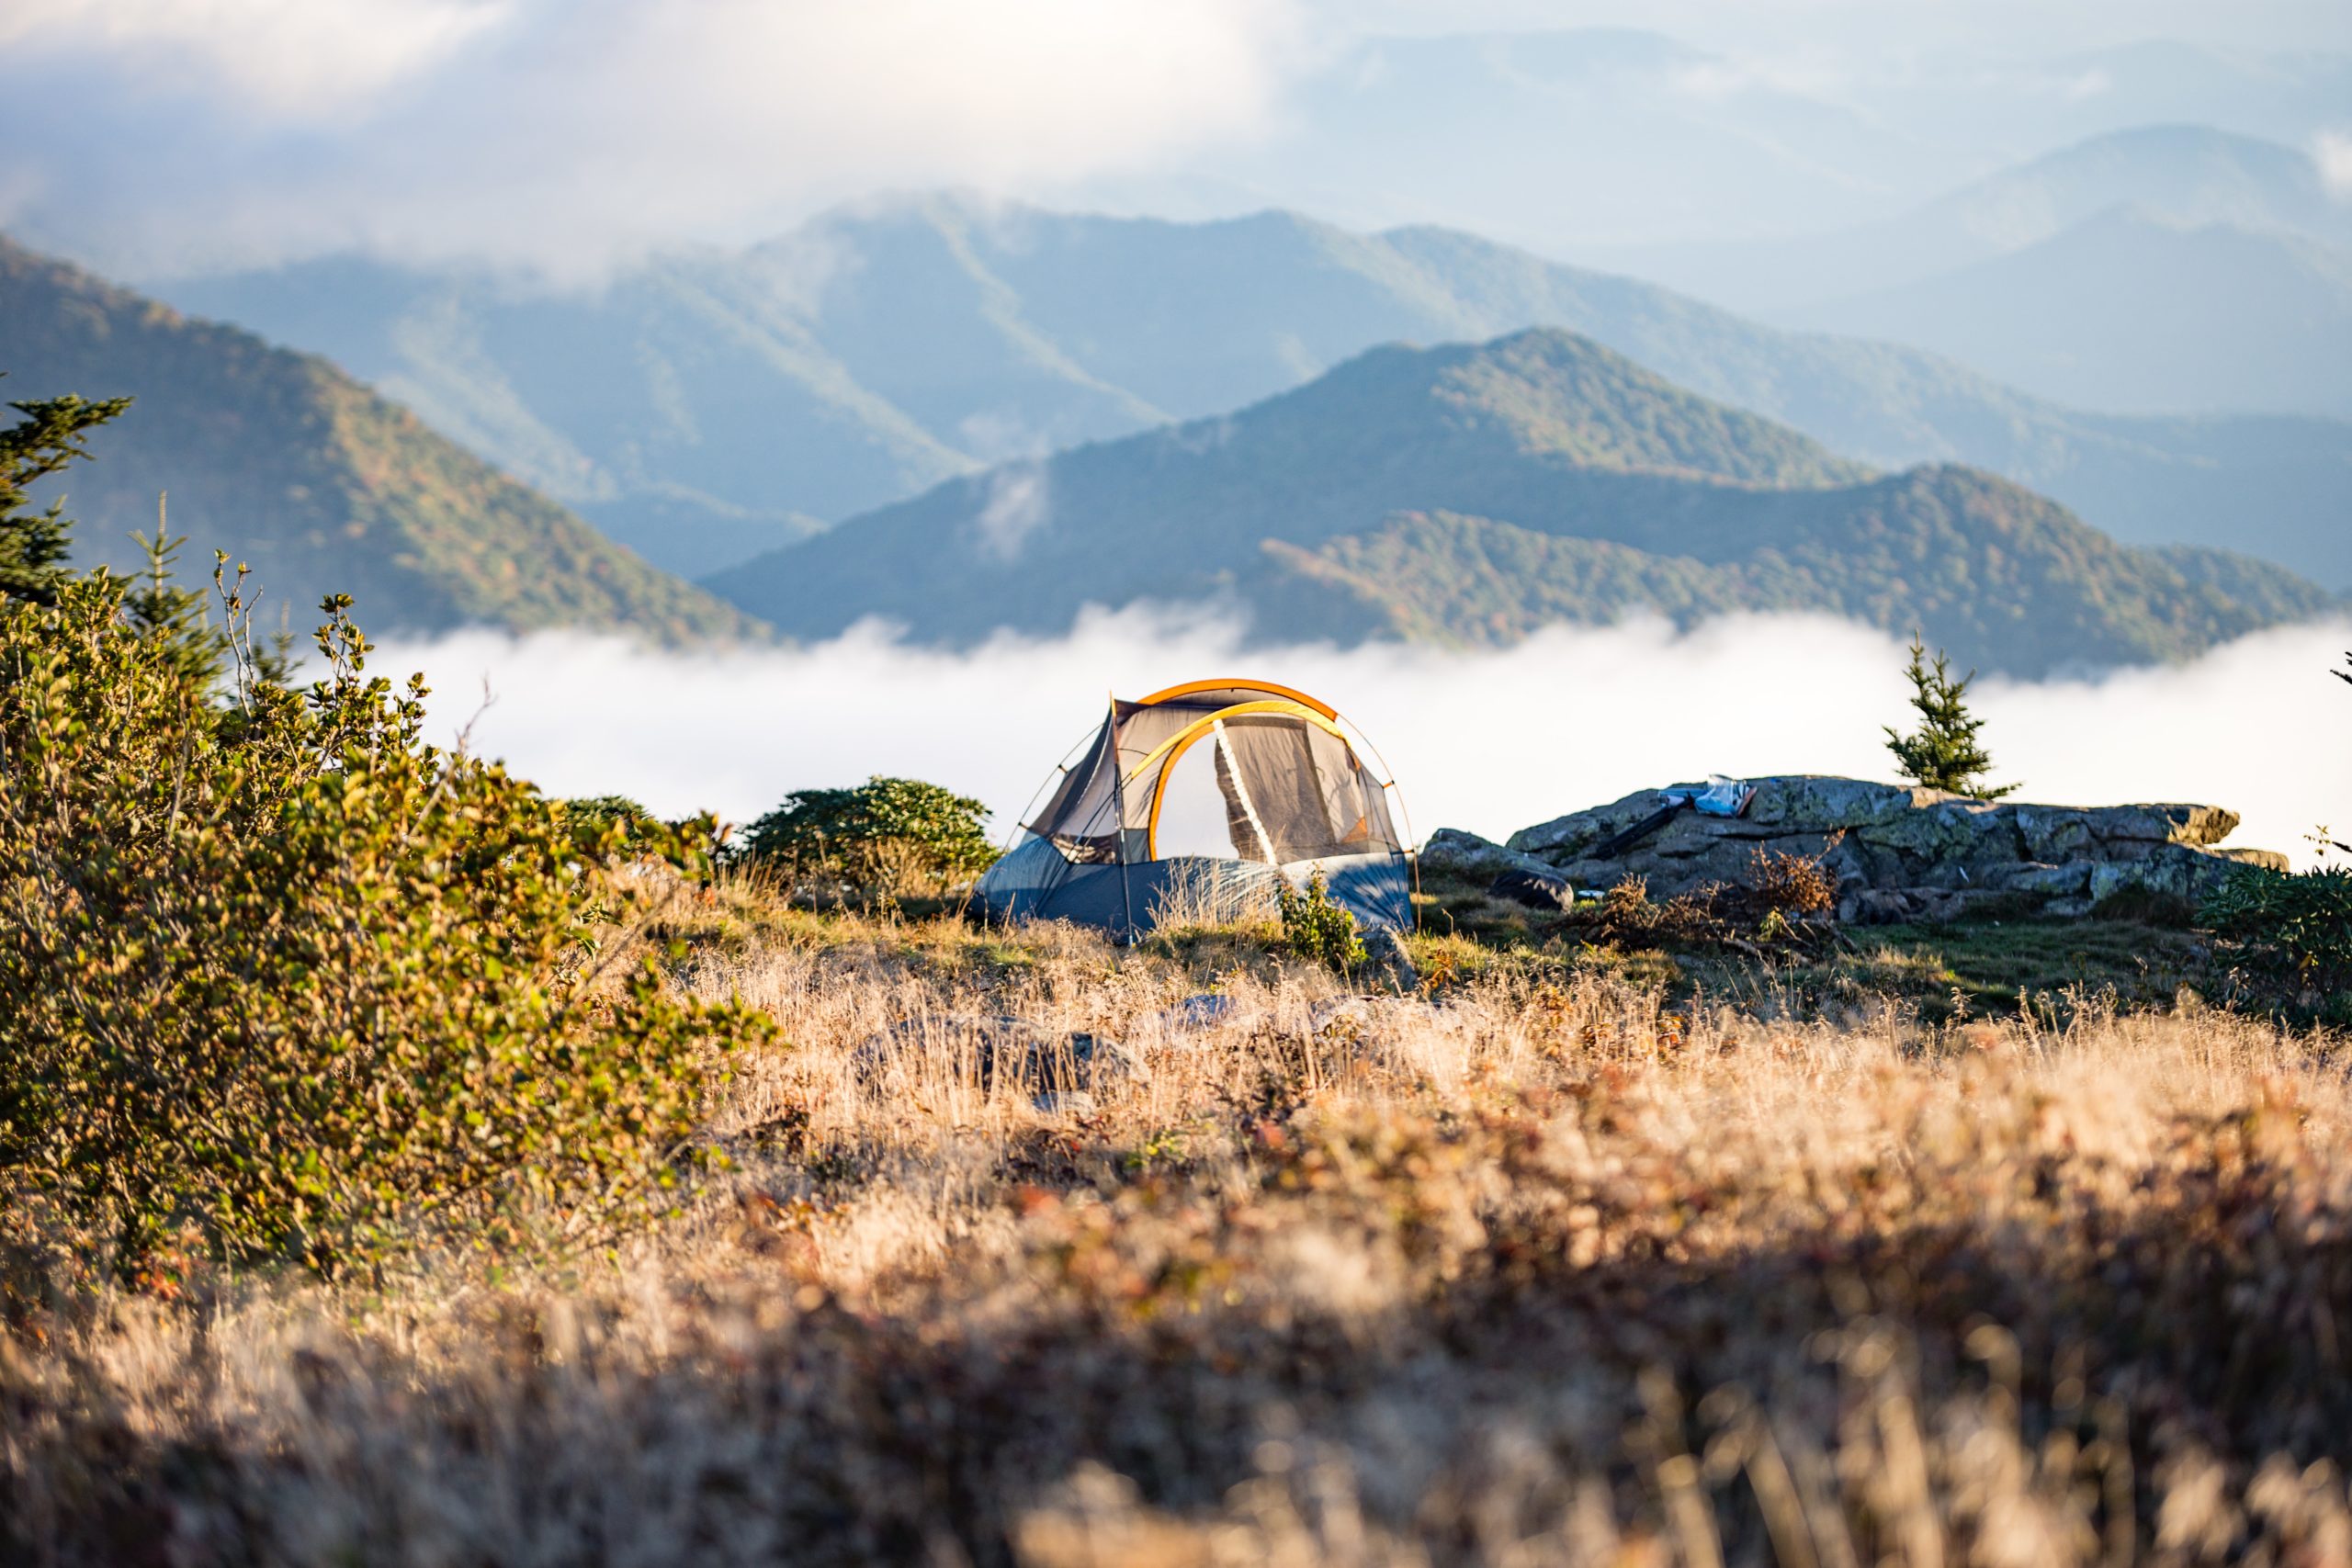 A Beginners Guide to Backcountry Camping